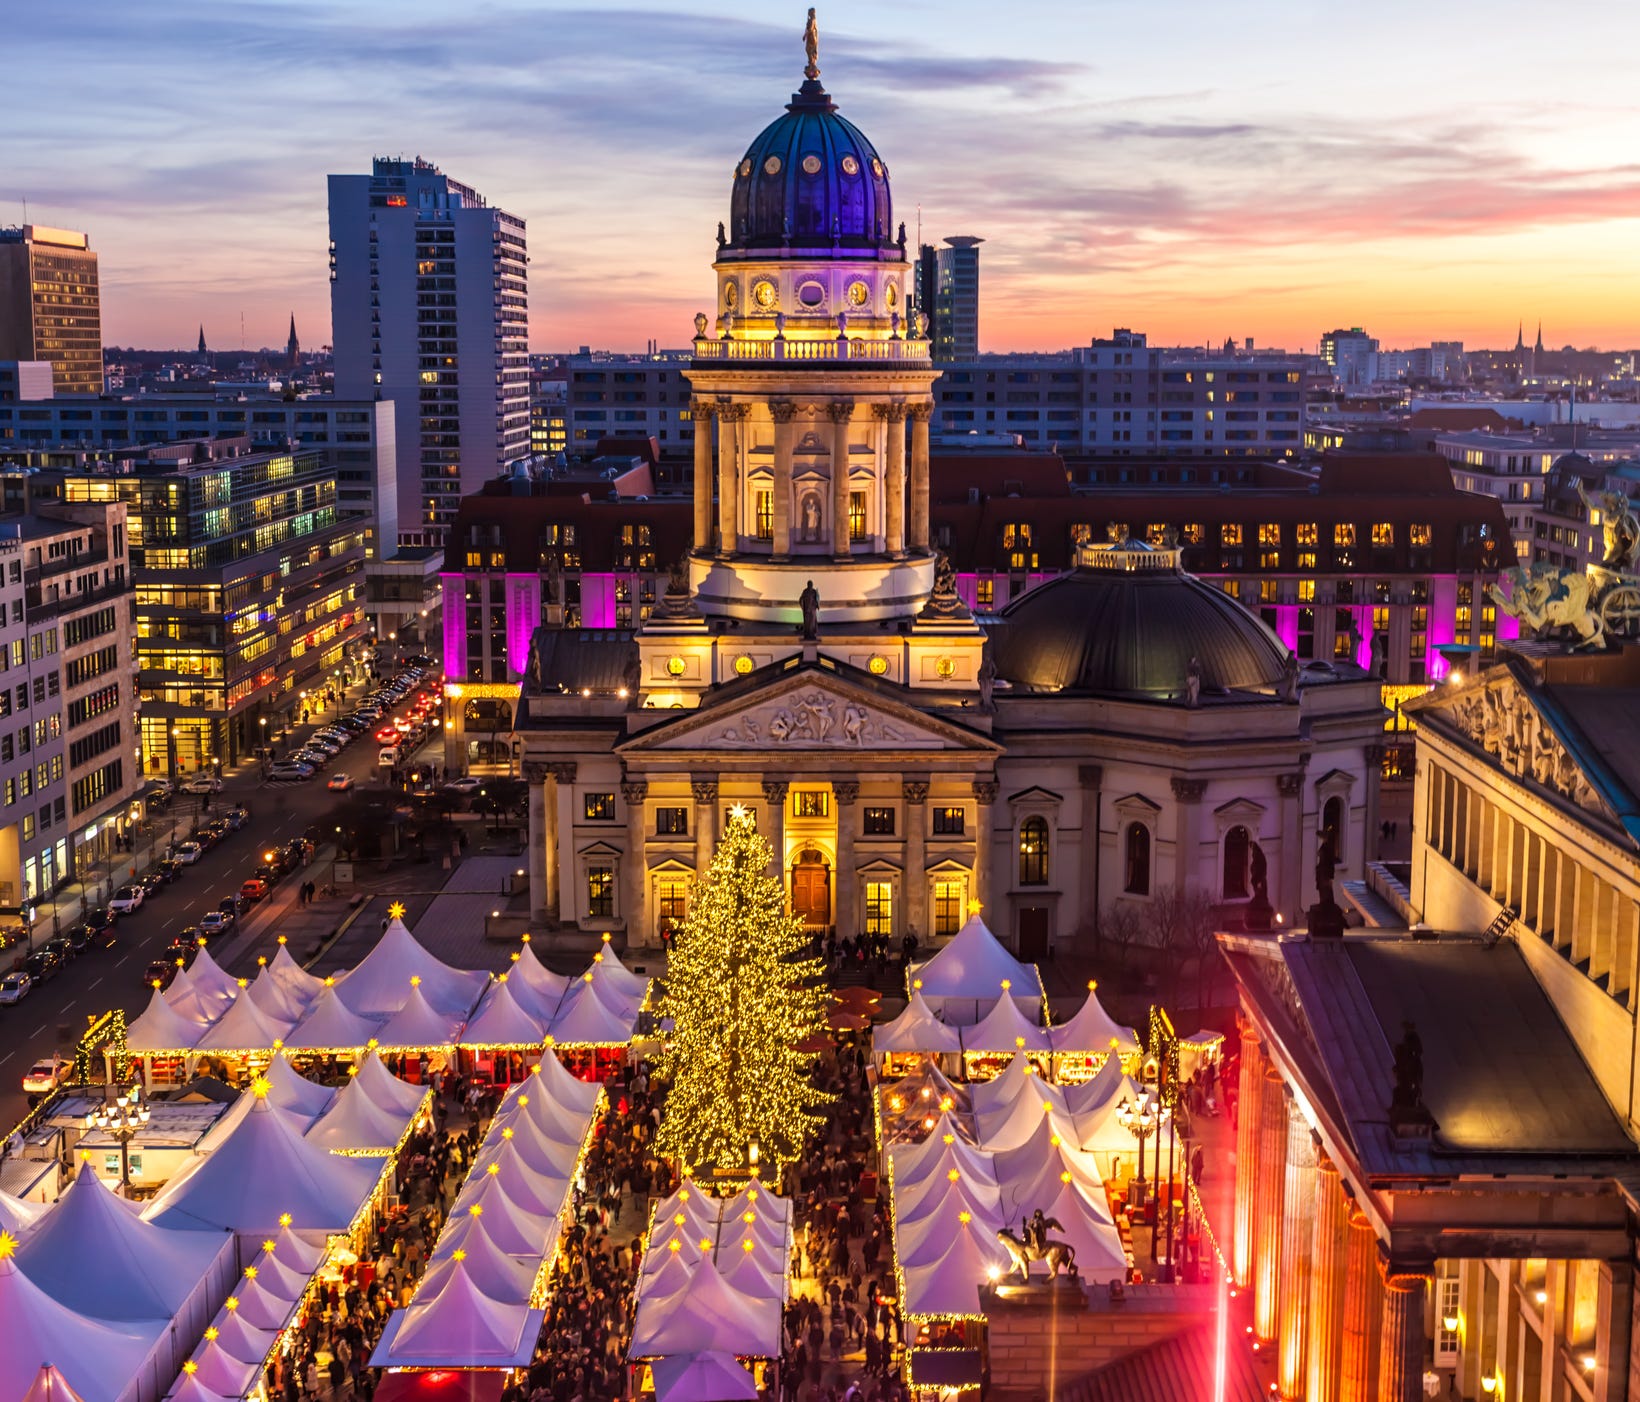 Berlin: This year, one of the best places to go for the holidays is also affordable. Airfare to Germany is very affordable, especially to Berlin. You'll find routes from Los Angeles for an average of $400 round-trip or $558 from New York during the w